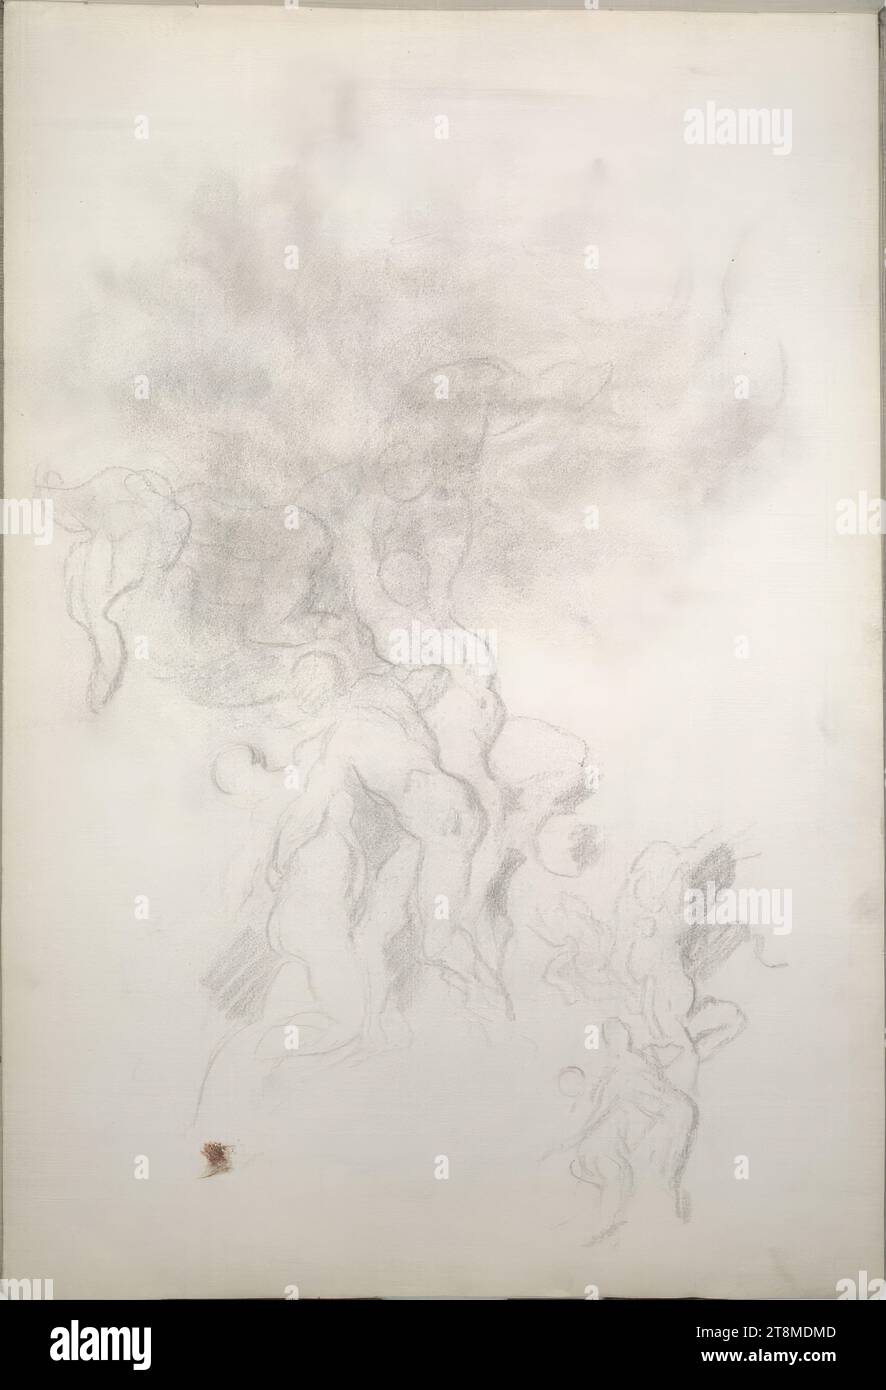 Figural compositional sketch for the 'Circle of Life', Canon Hans sketchbook; 25 paginated pages, Hans Canon (Vienna 1829 - 1885 Vienna), around 1880, drawing, charcoal, sheet: 42.8 cm x 28.8 cm Stock Photo